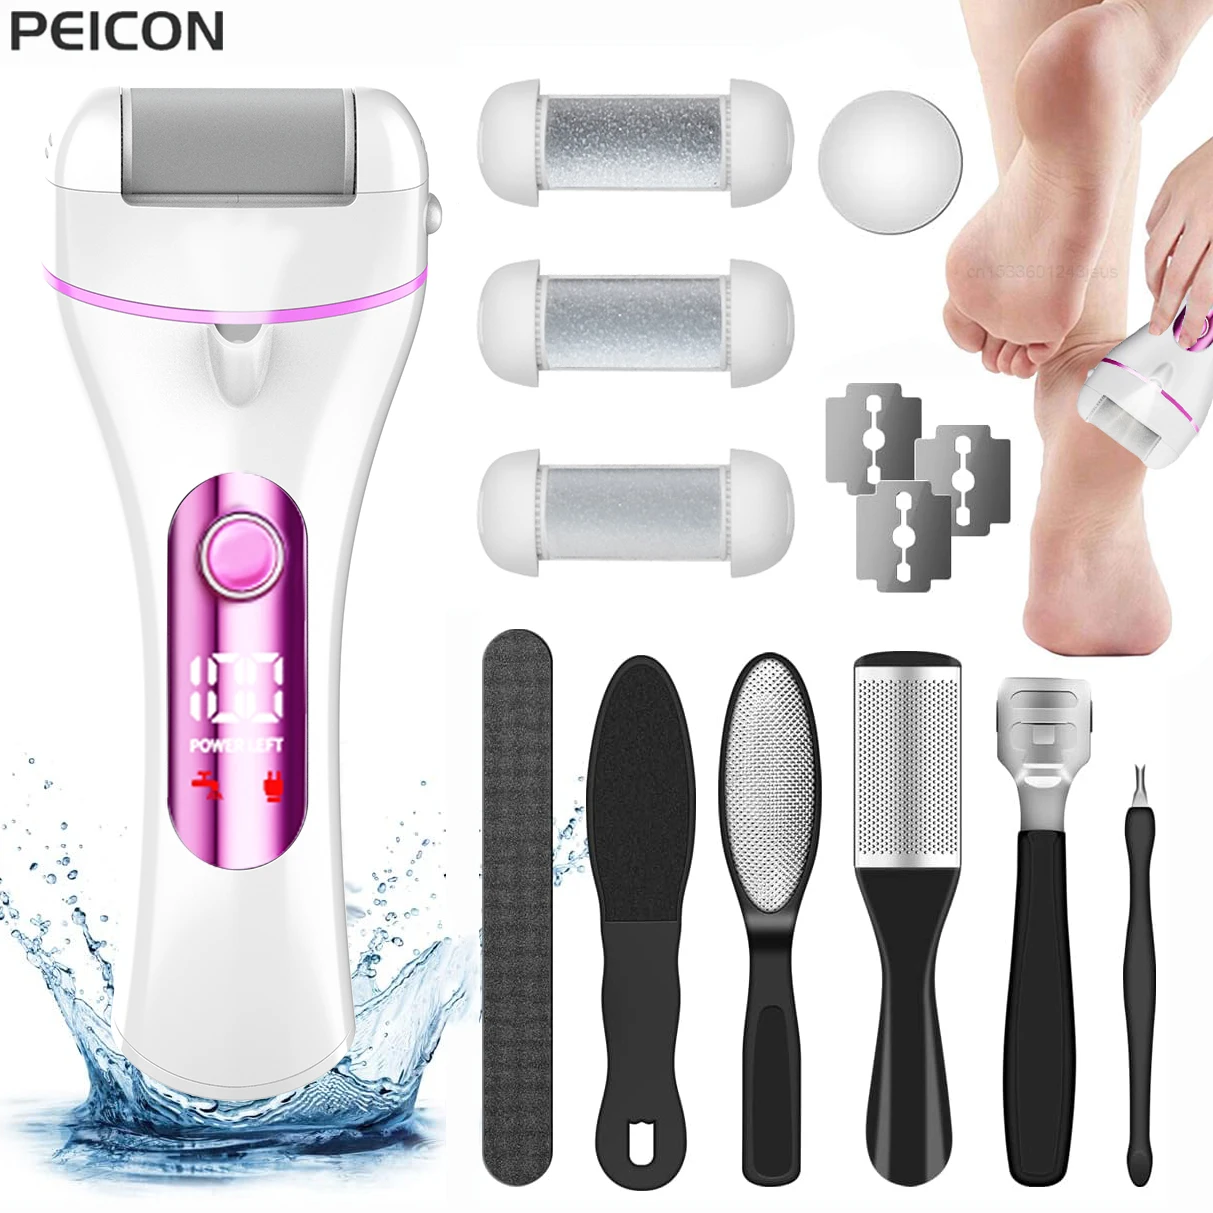 https://ae01.alicdn.com/kf/S45be0f3631a9433092ff6463c152ce42O/Electric-Foot-File-Callus-Remover-Lime-For-Feet-And-Heels-Electric-Foot-Sandpaper-Pedicure-Foot-Exfoliator.jpg